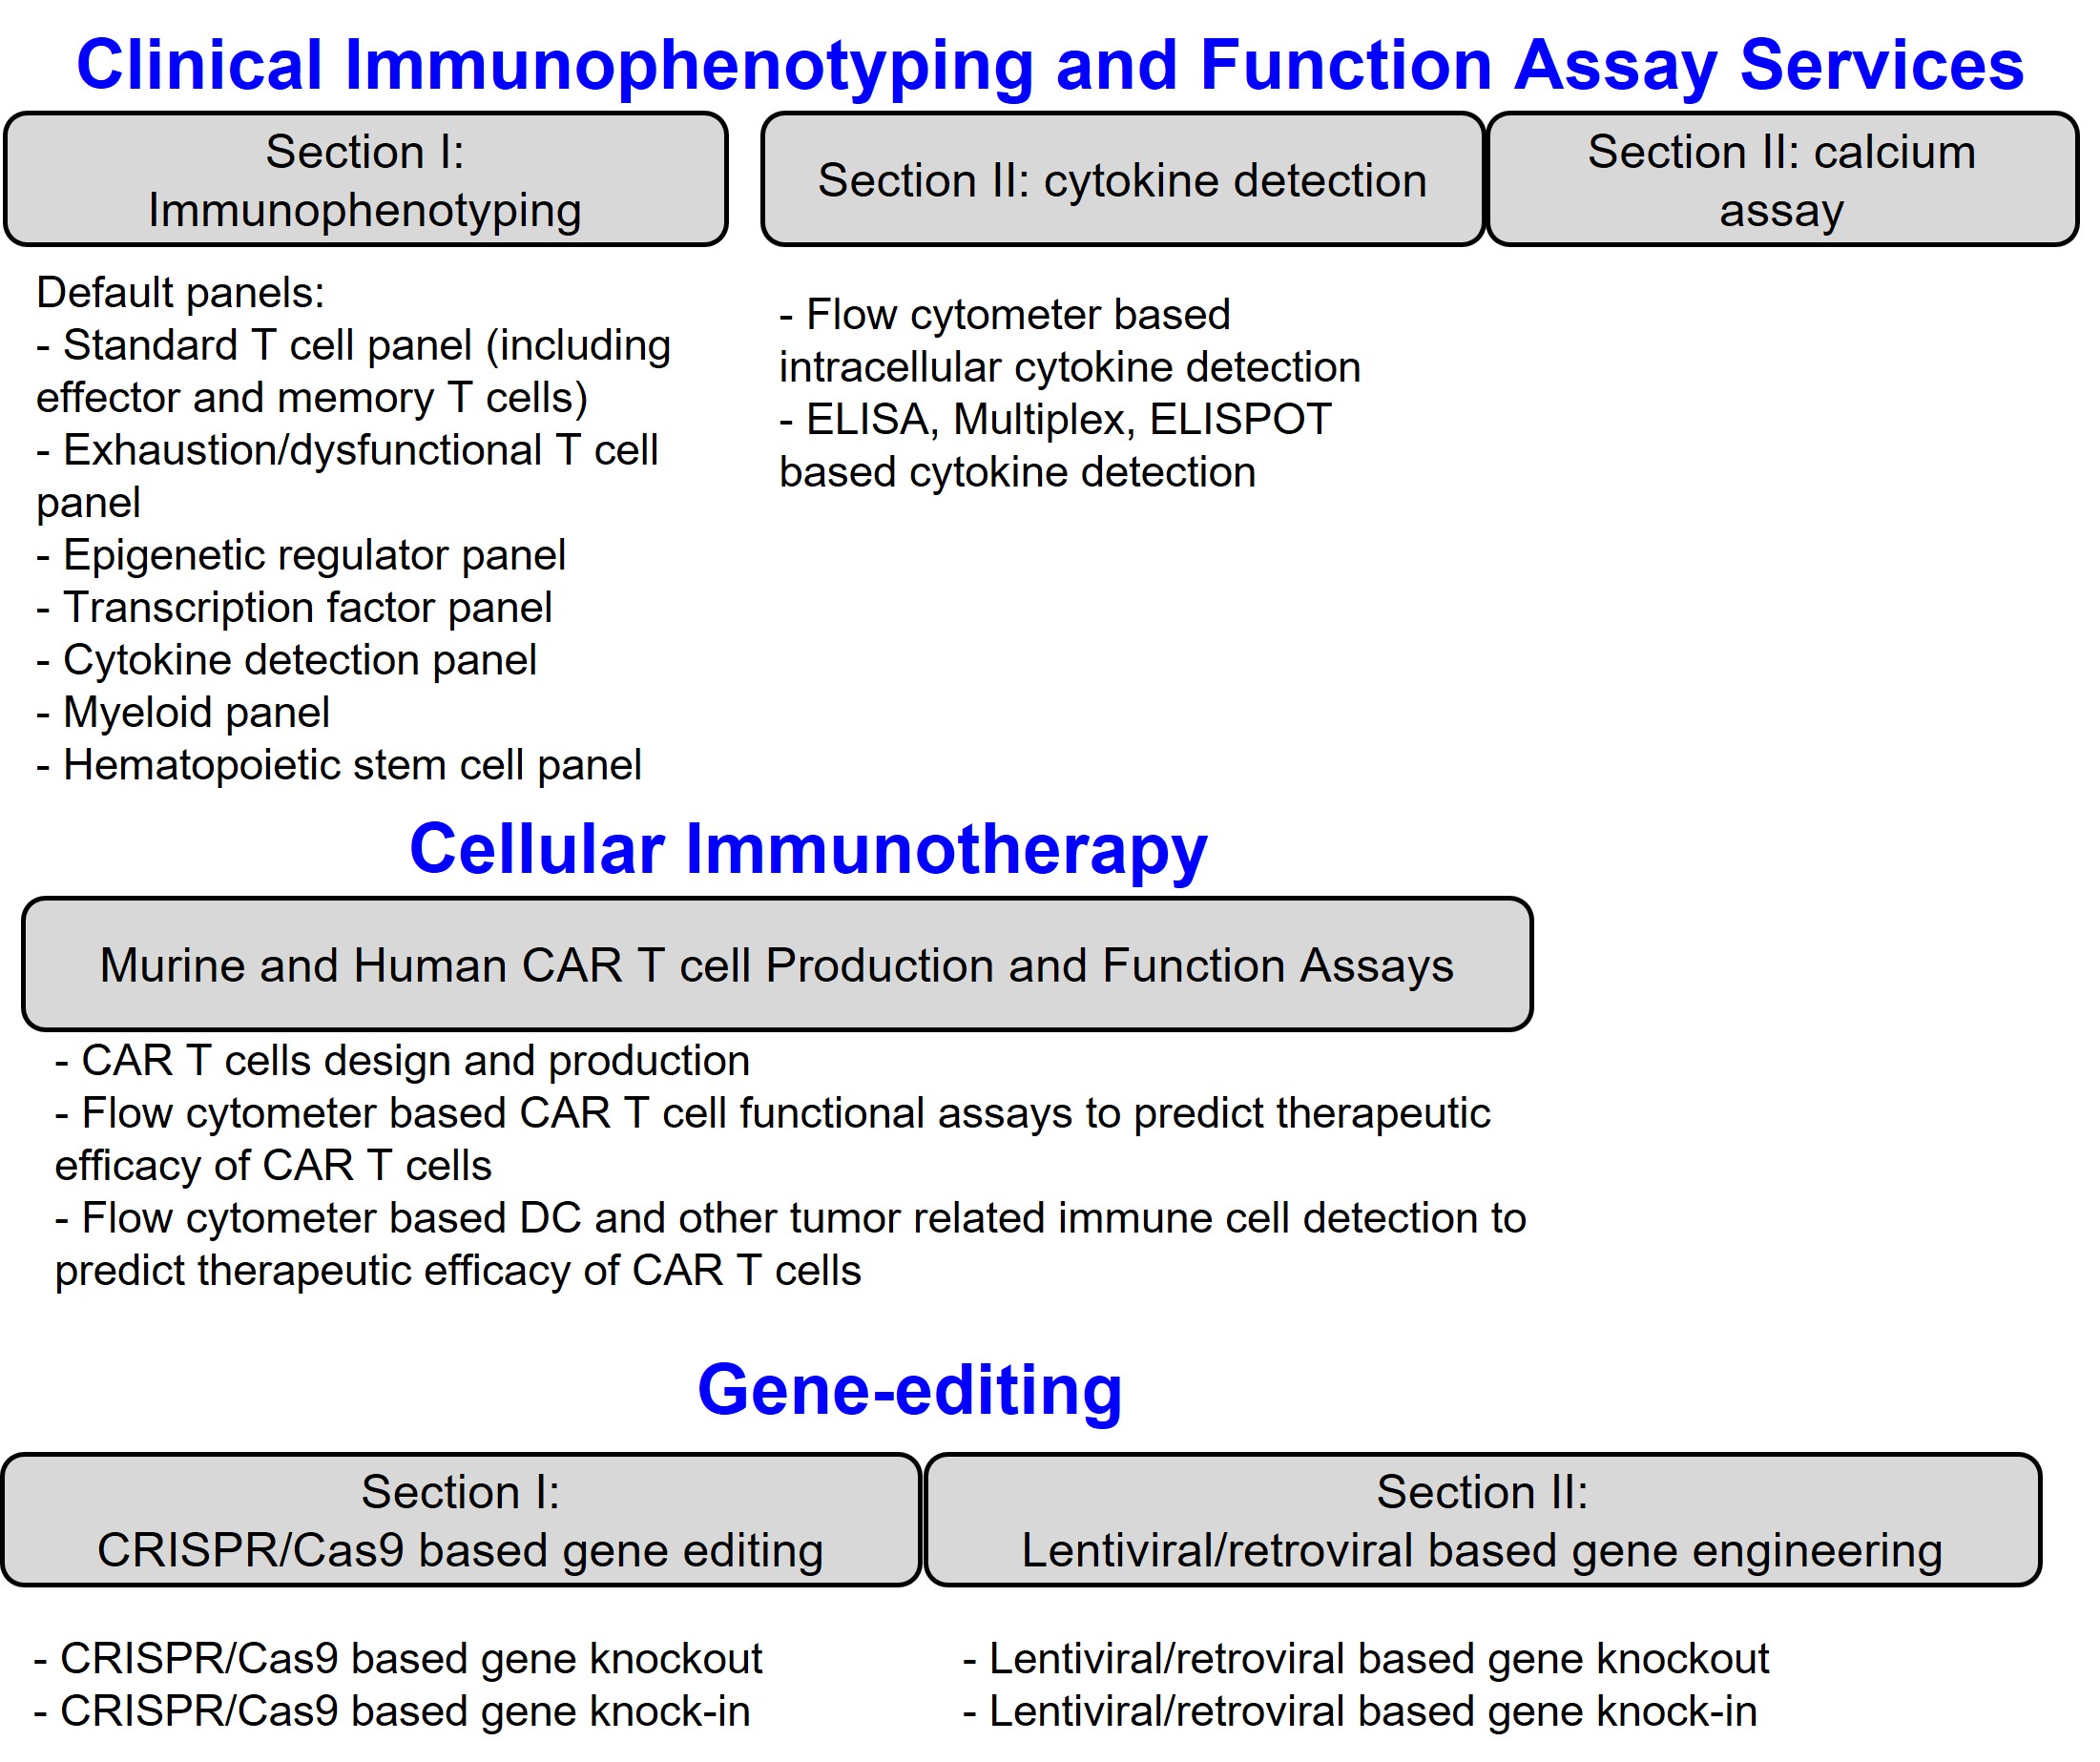 Clinical Immunophenotyping Services